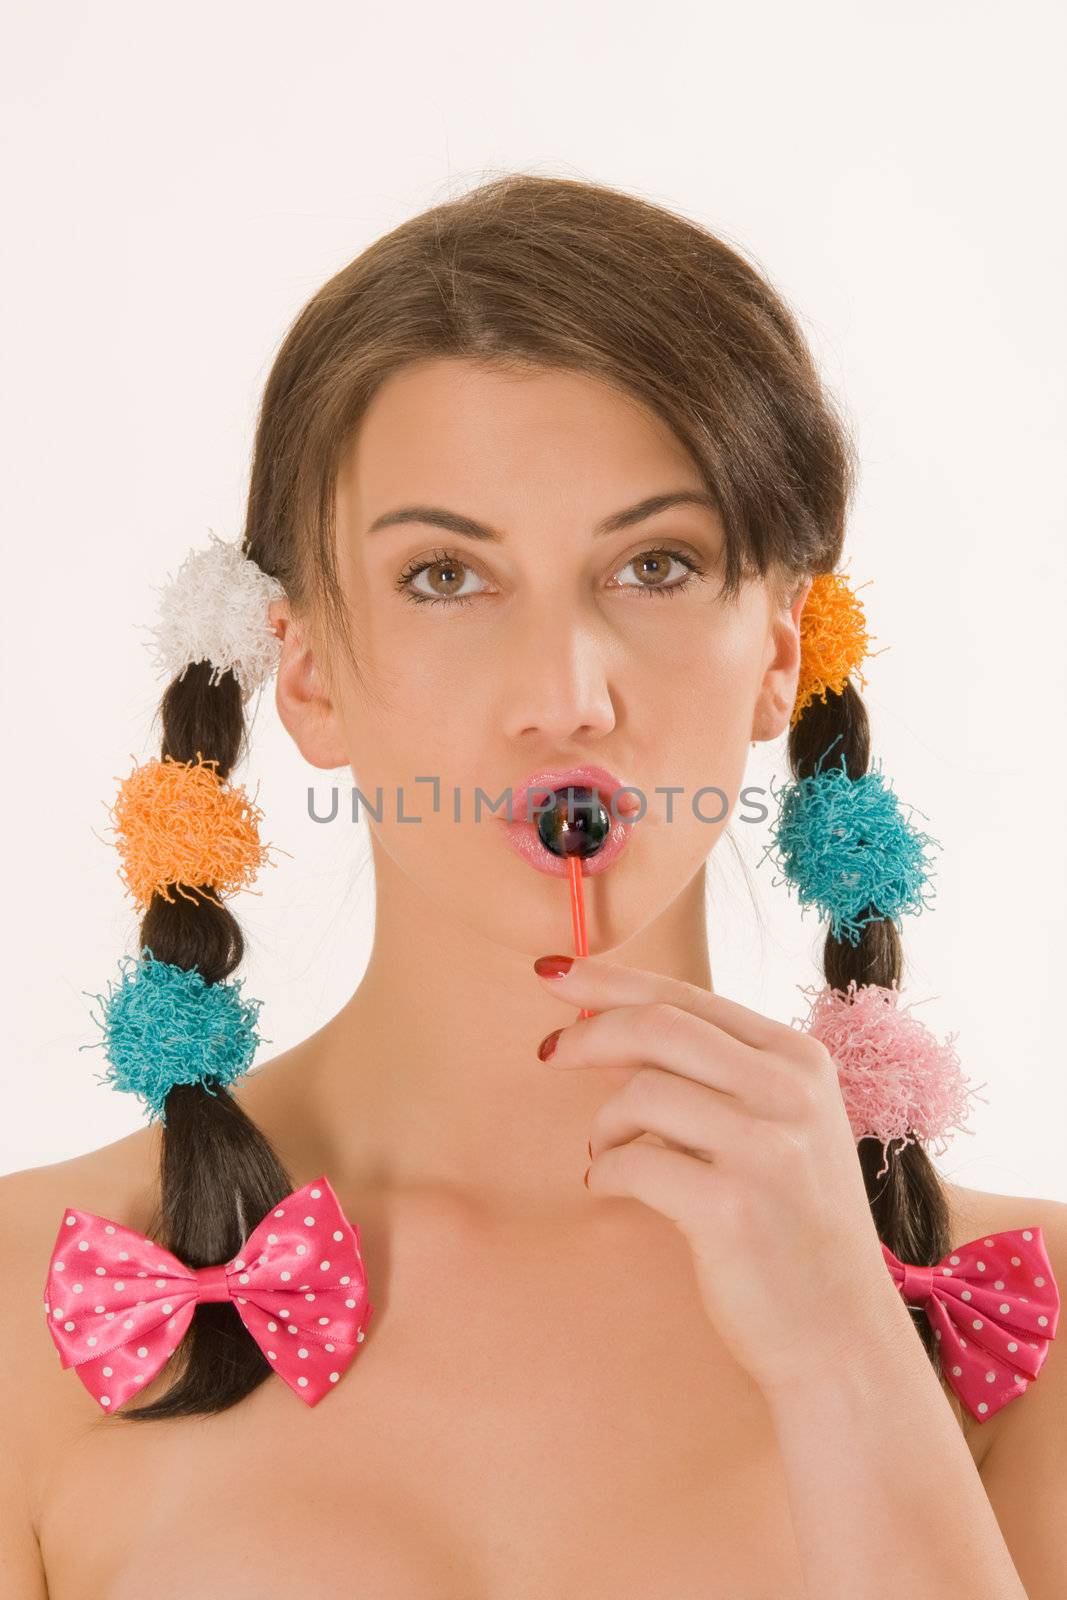 Girl with colorful braids licking a lollipop